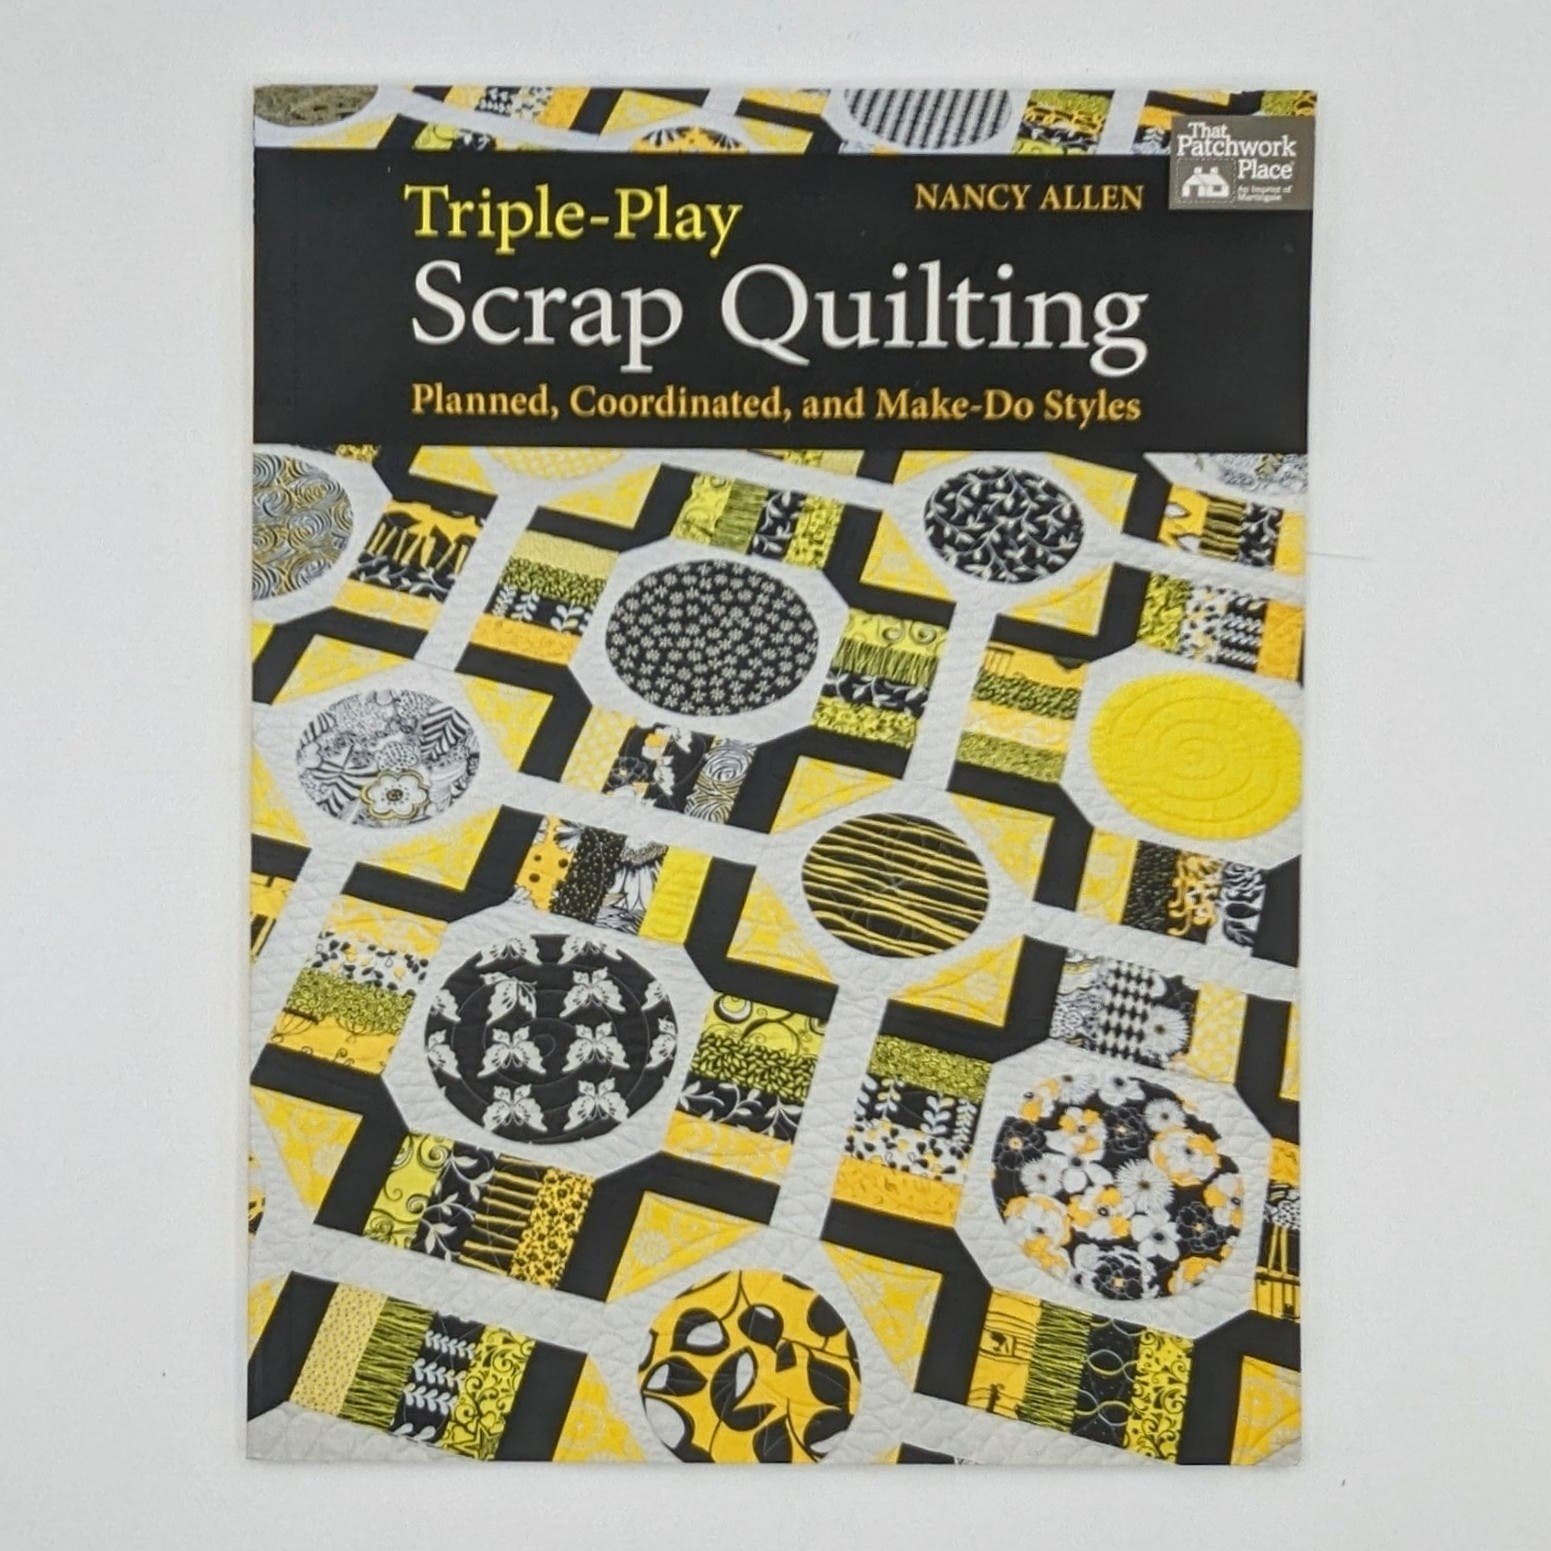 Triple-Play Scrap Quilting Planned Coordinated and Make